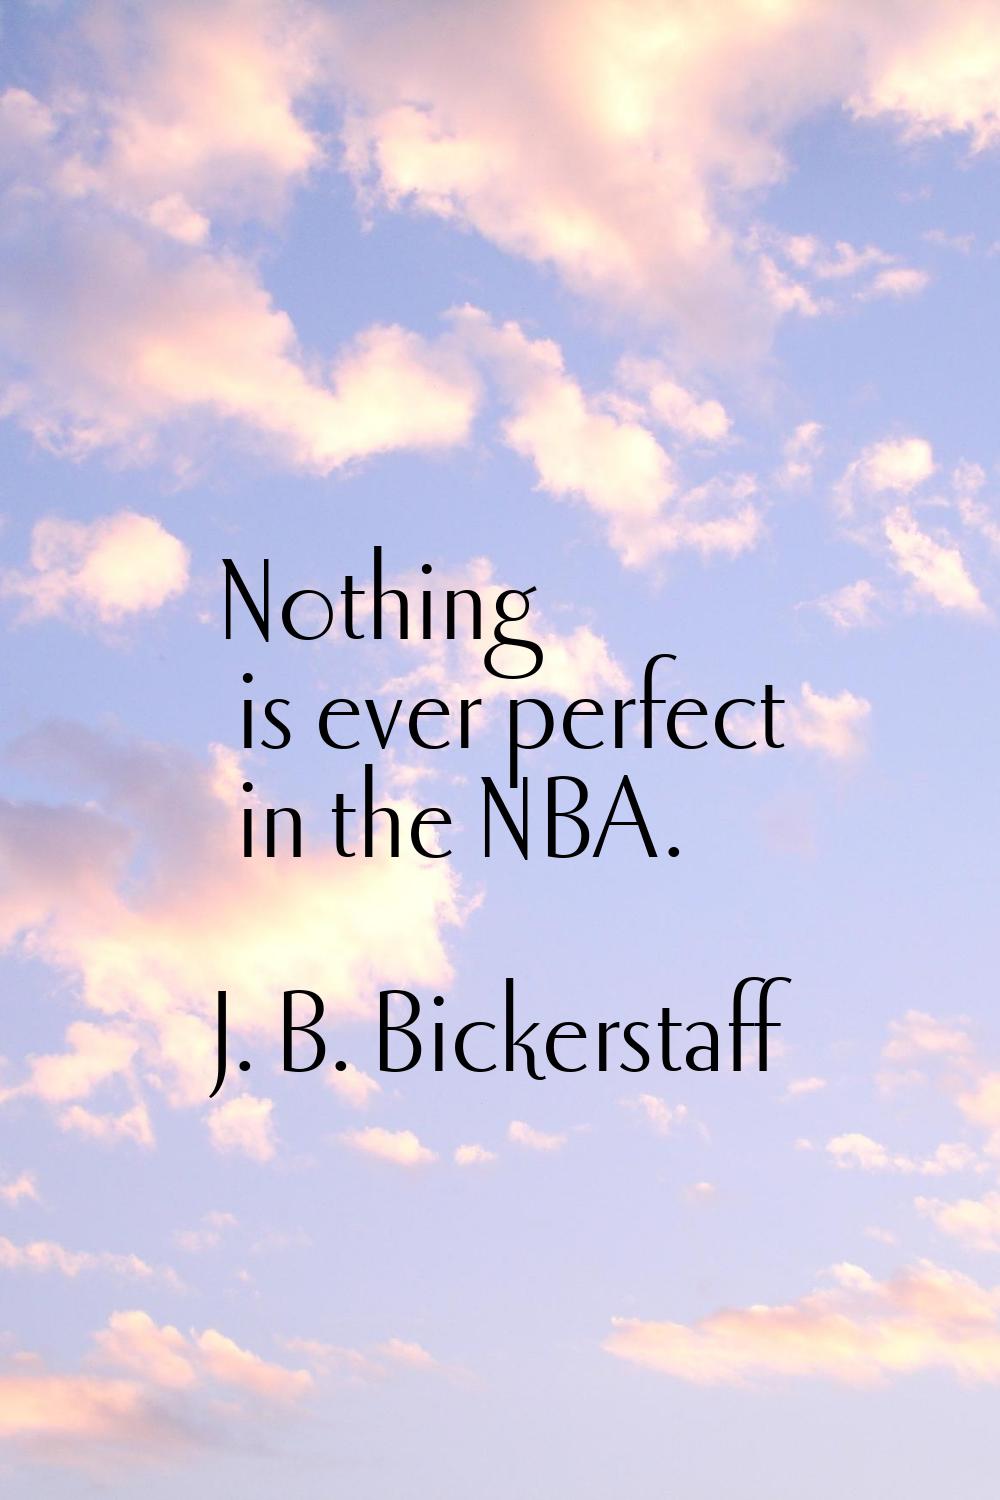 Nothing is ever perfect in the NBA.